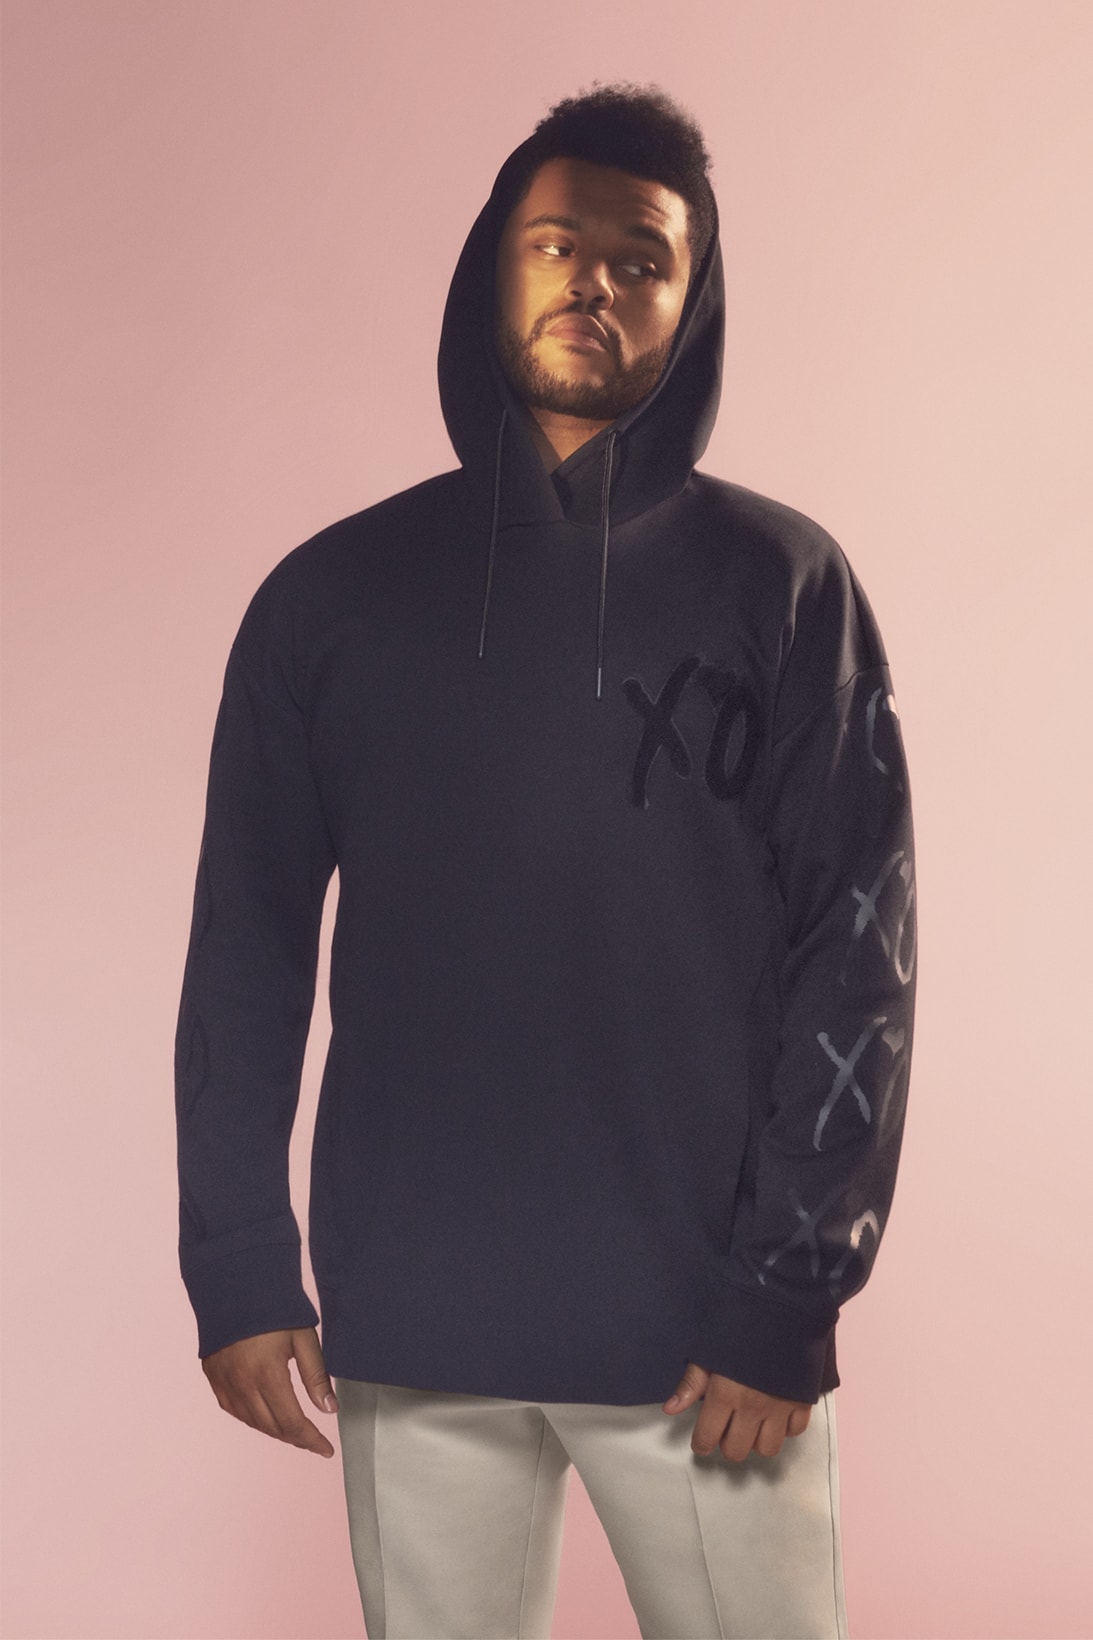 The Weeknd H&M 2017 Spring Icons